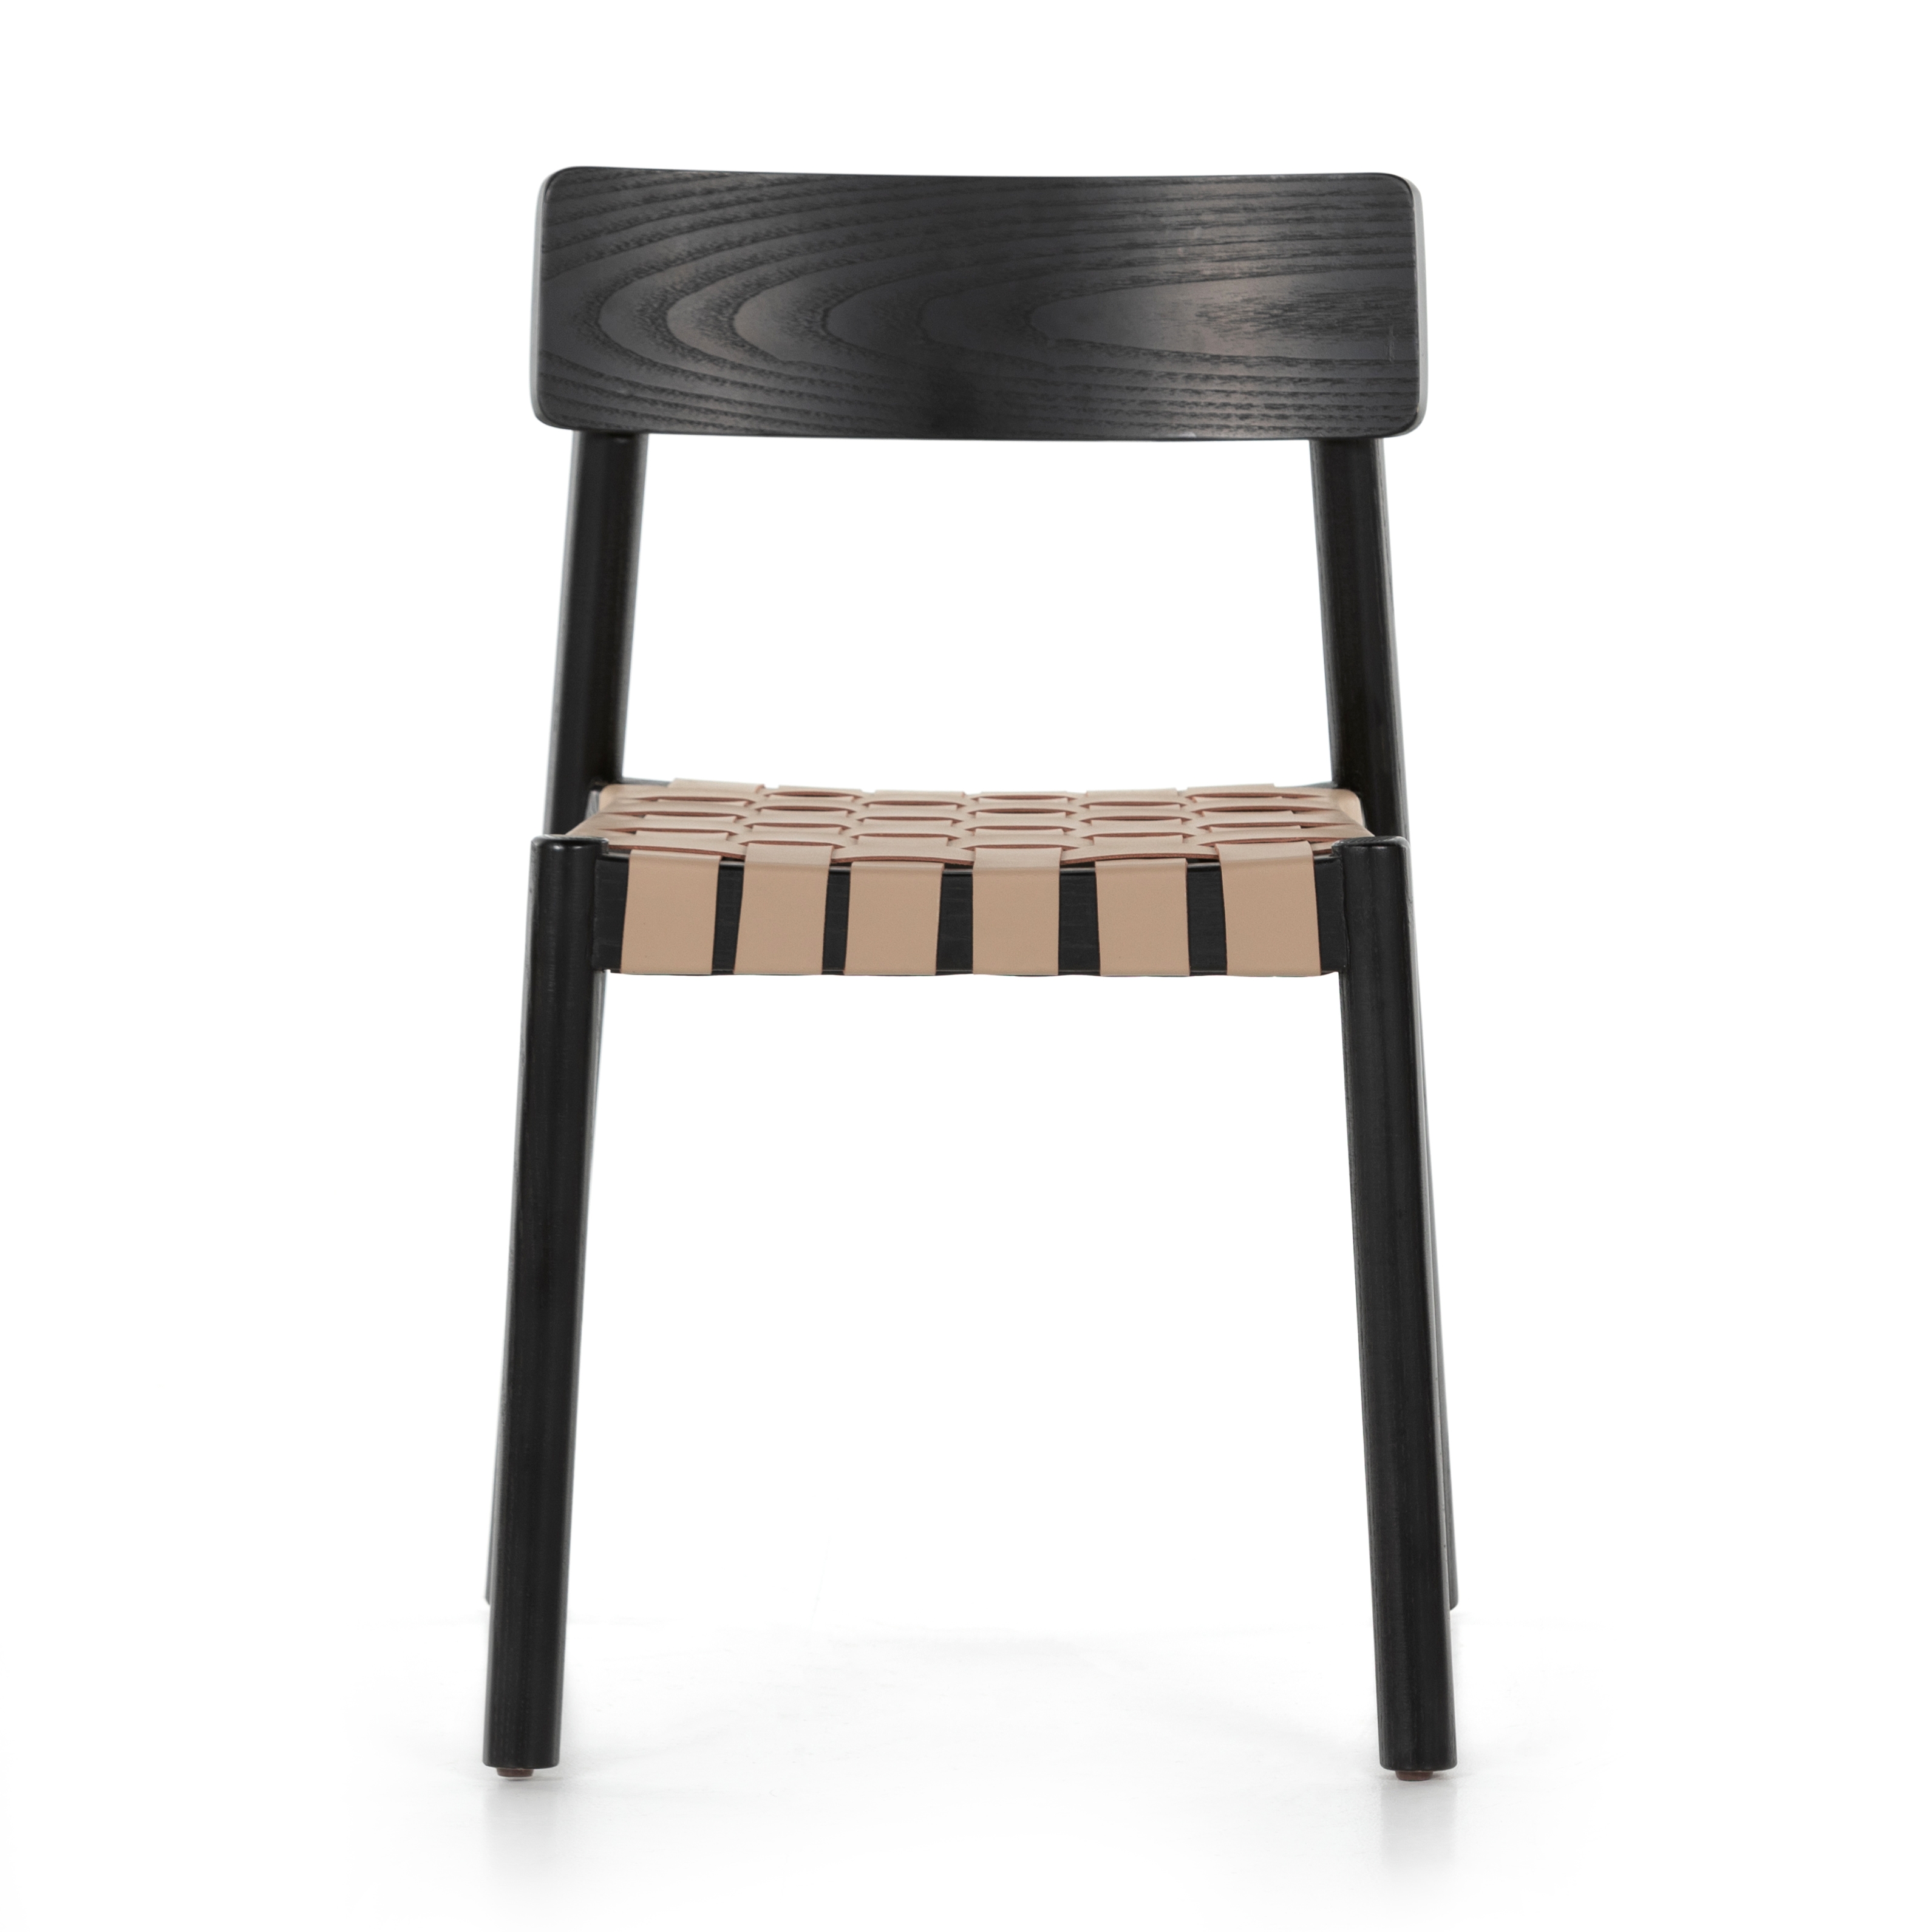 Heisler Dining Chair-Almond Le Blend - Image 3